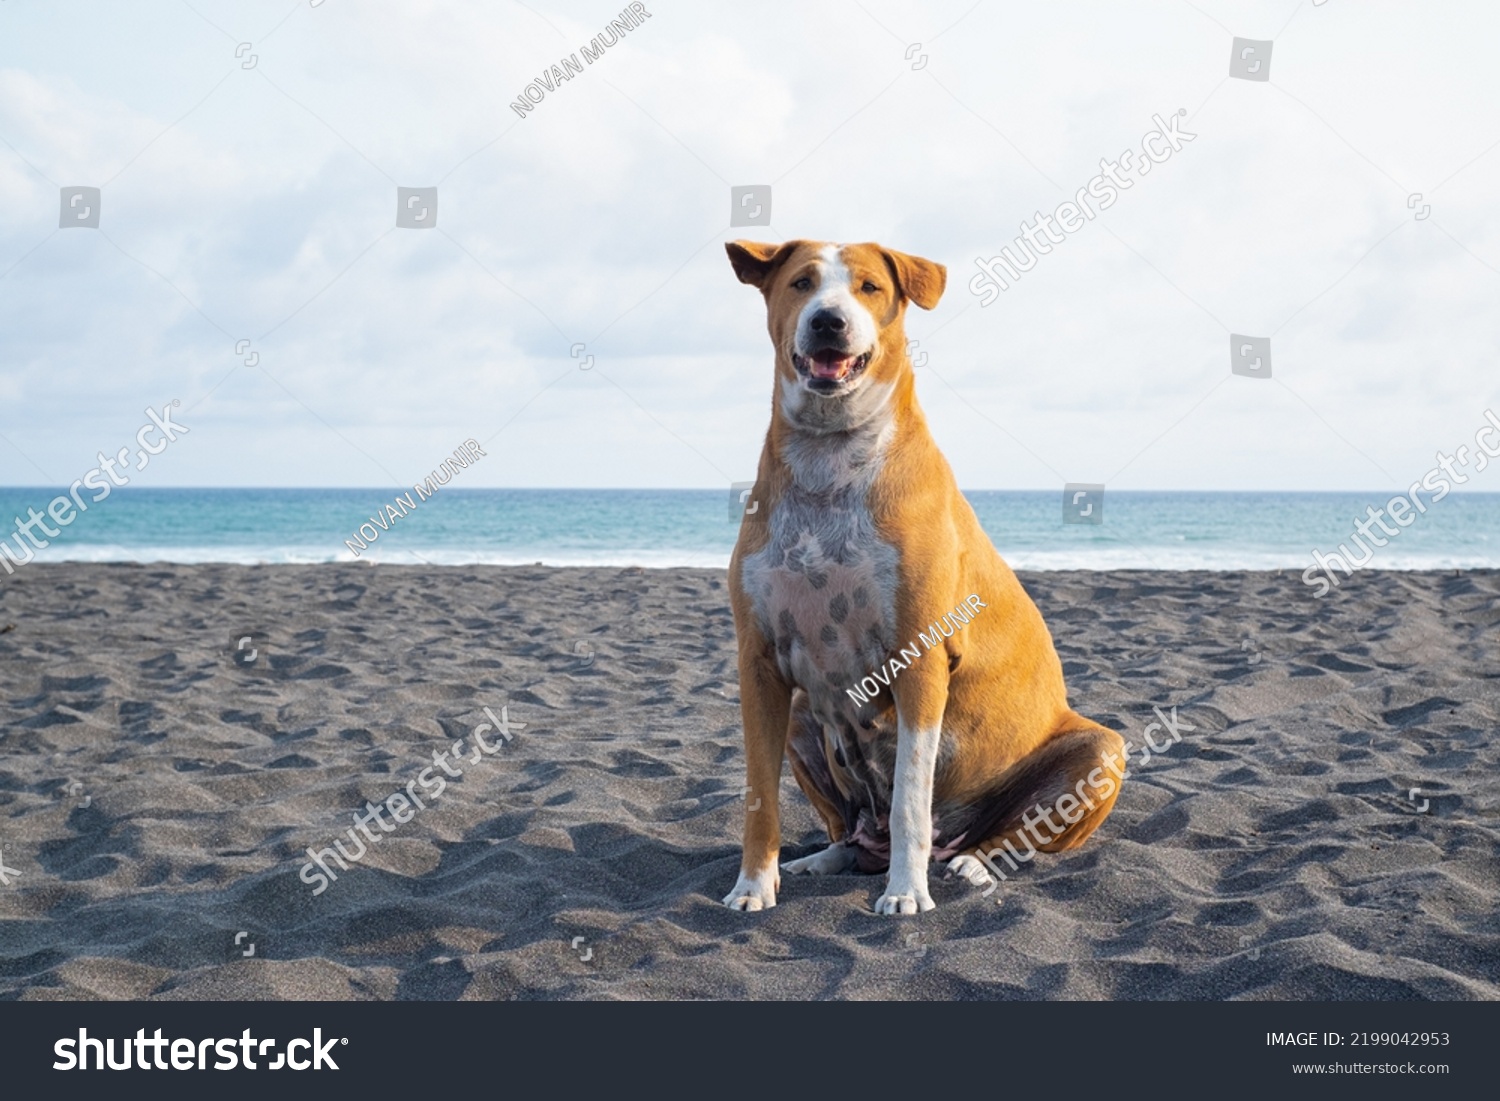 Portray of a dog enjoying her life on the beach before sunset. #2199042953